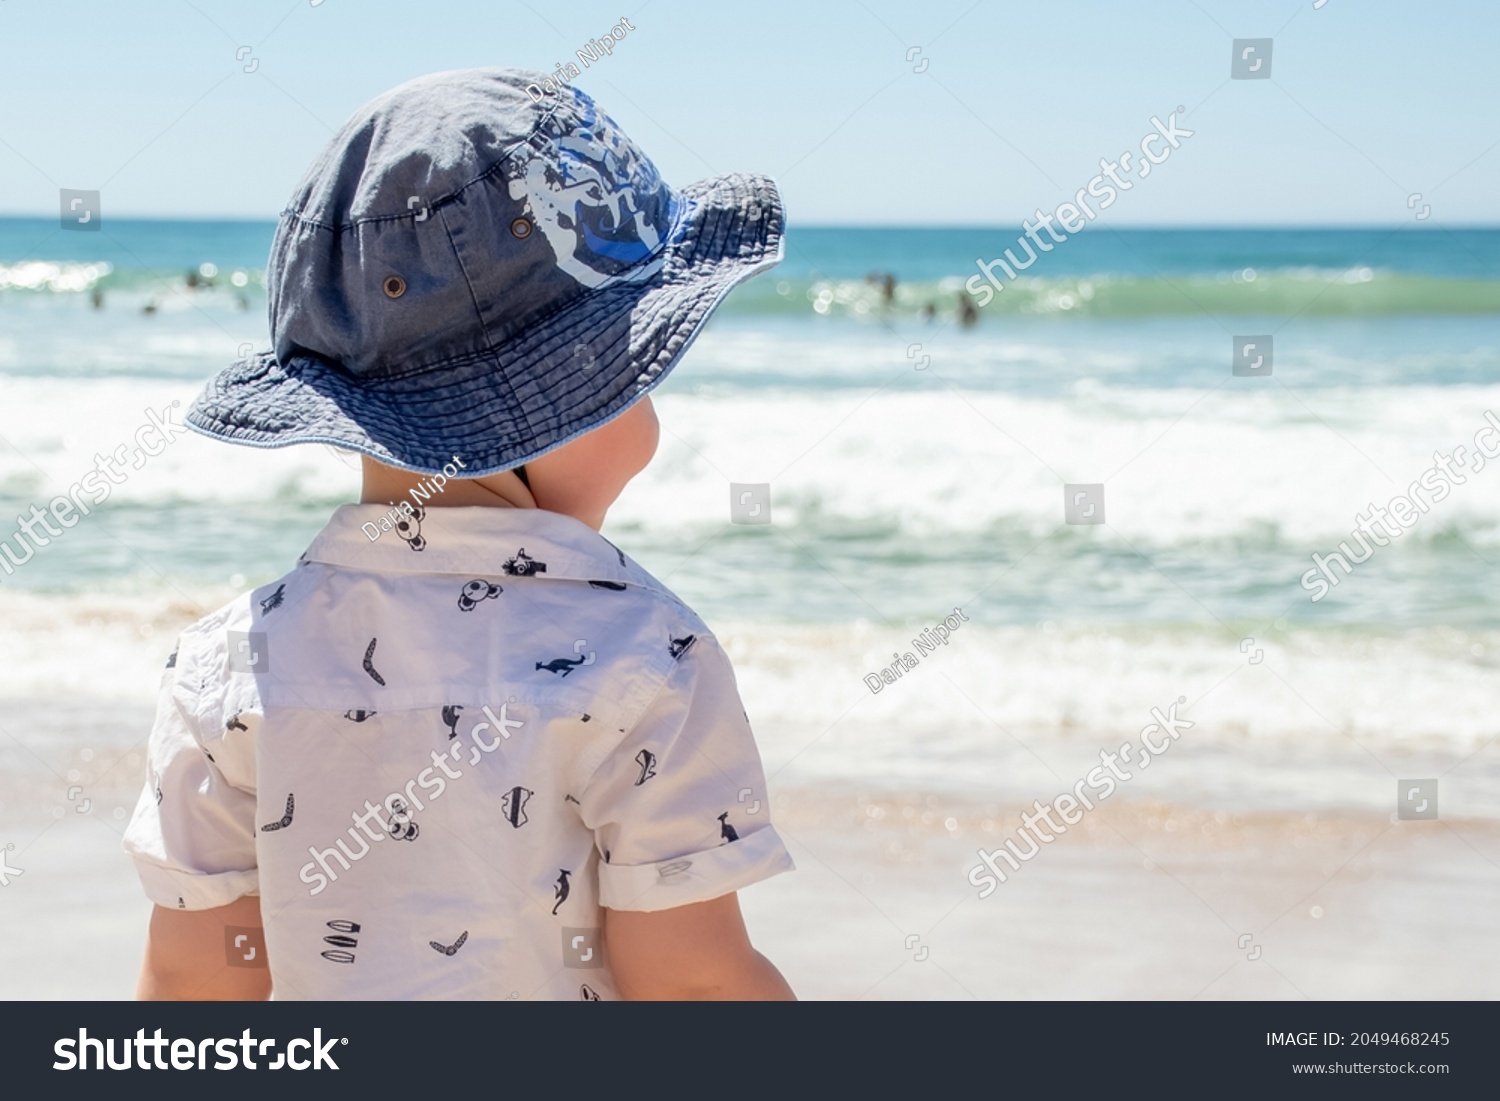 Little boy wearing hat on a sandy ocean beach in Australia. Sun safety - Sunscreen, hat and shirt. Travel with kids #2049468245